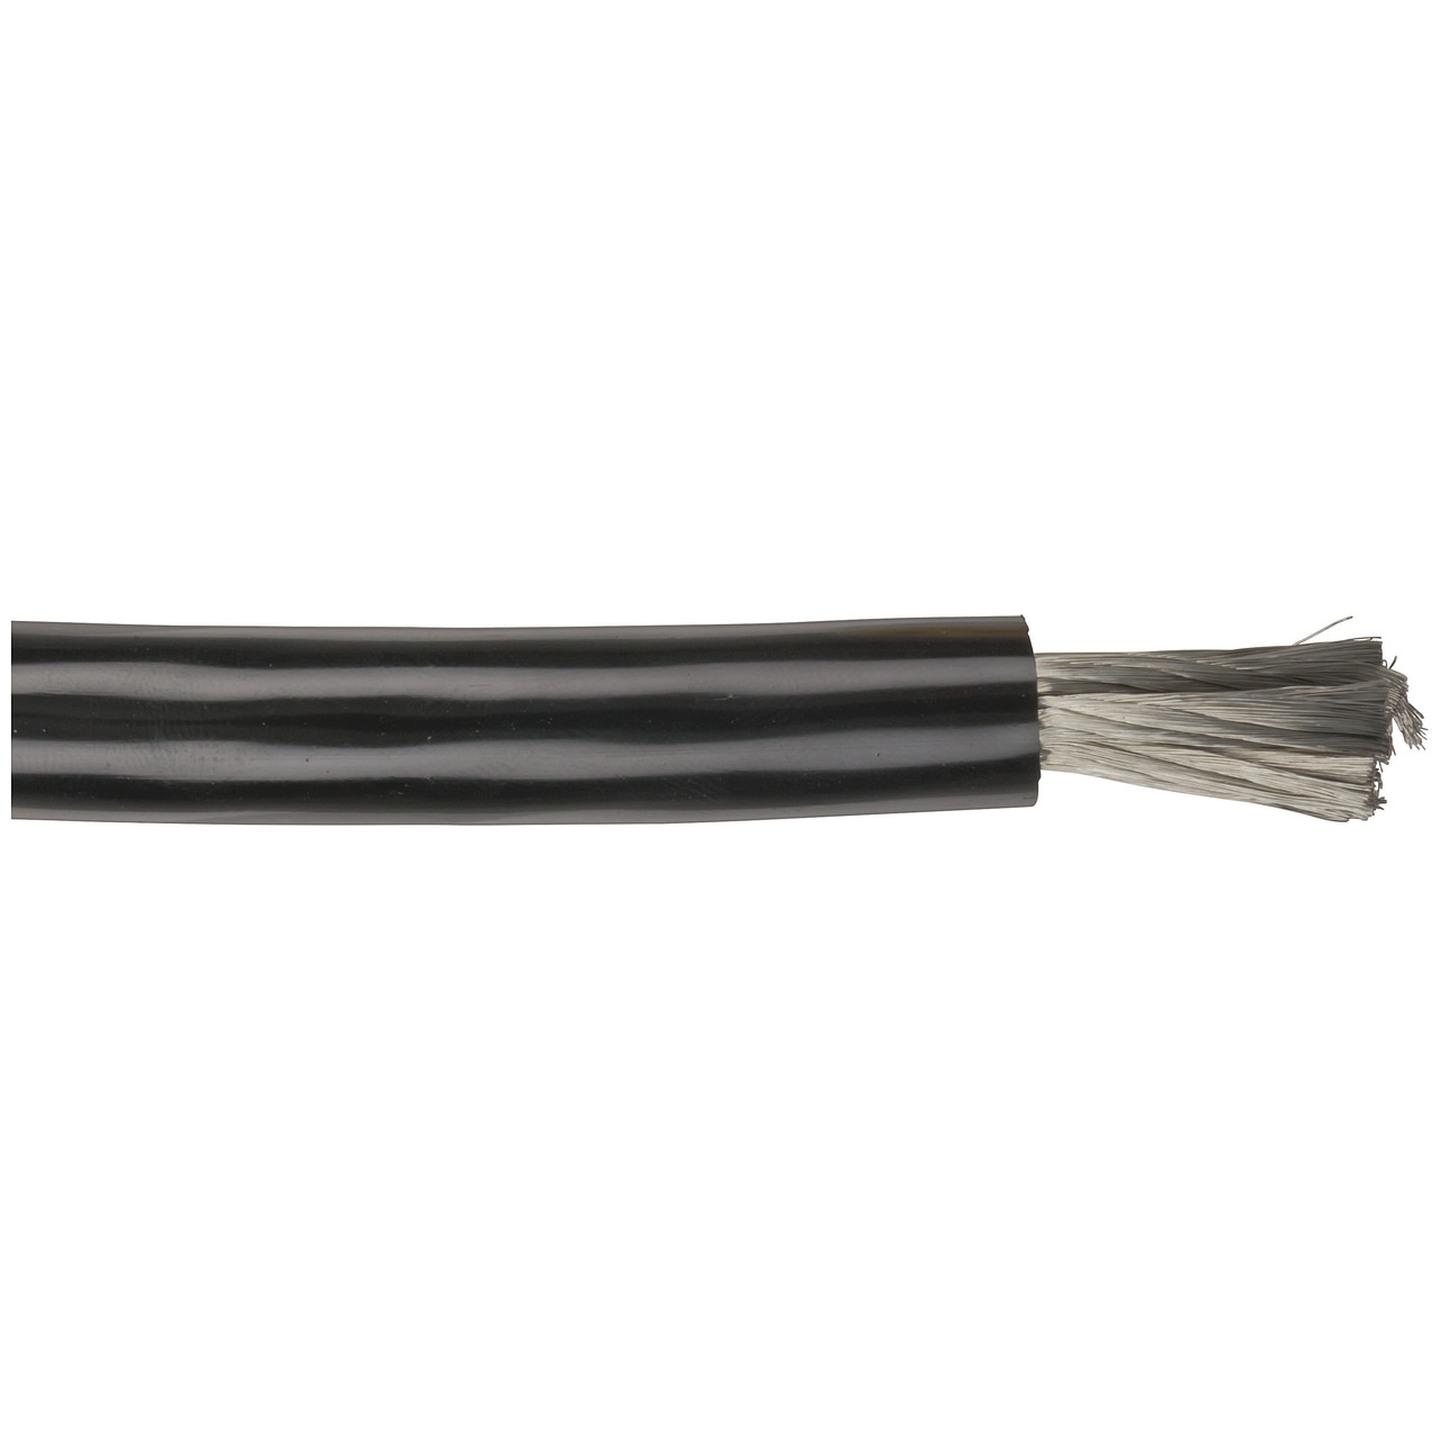 Black 2G Car Power Cable